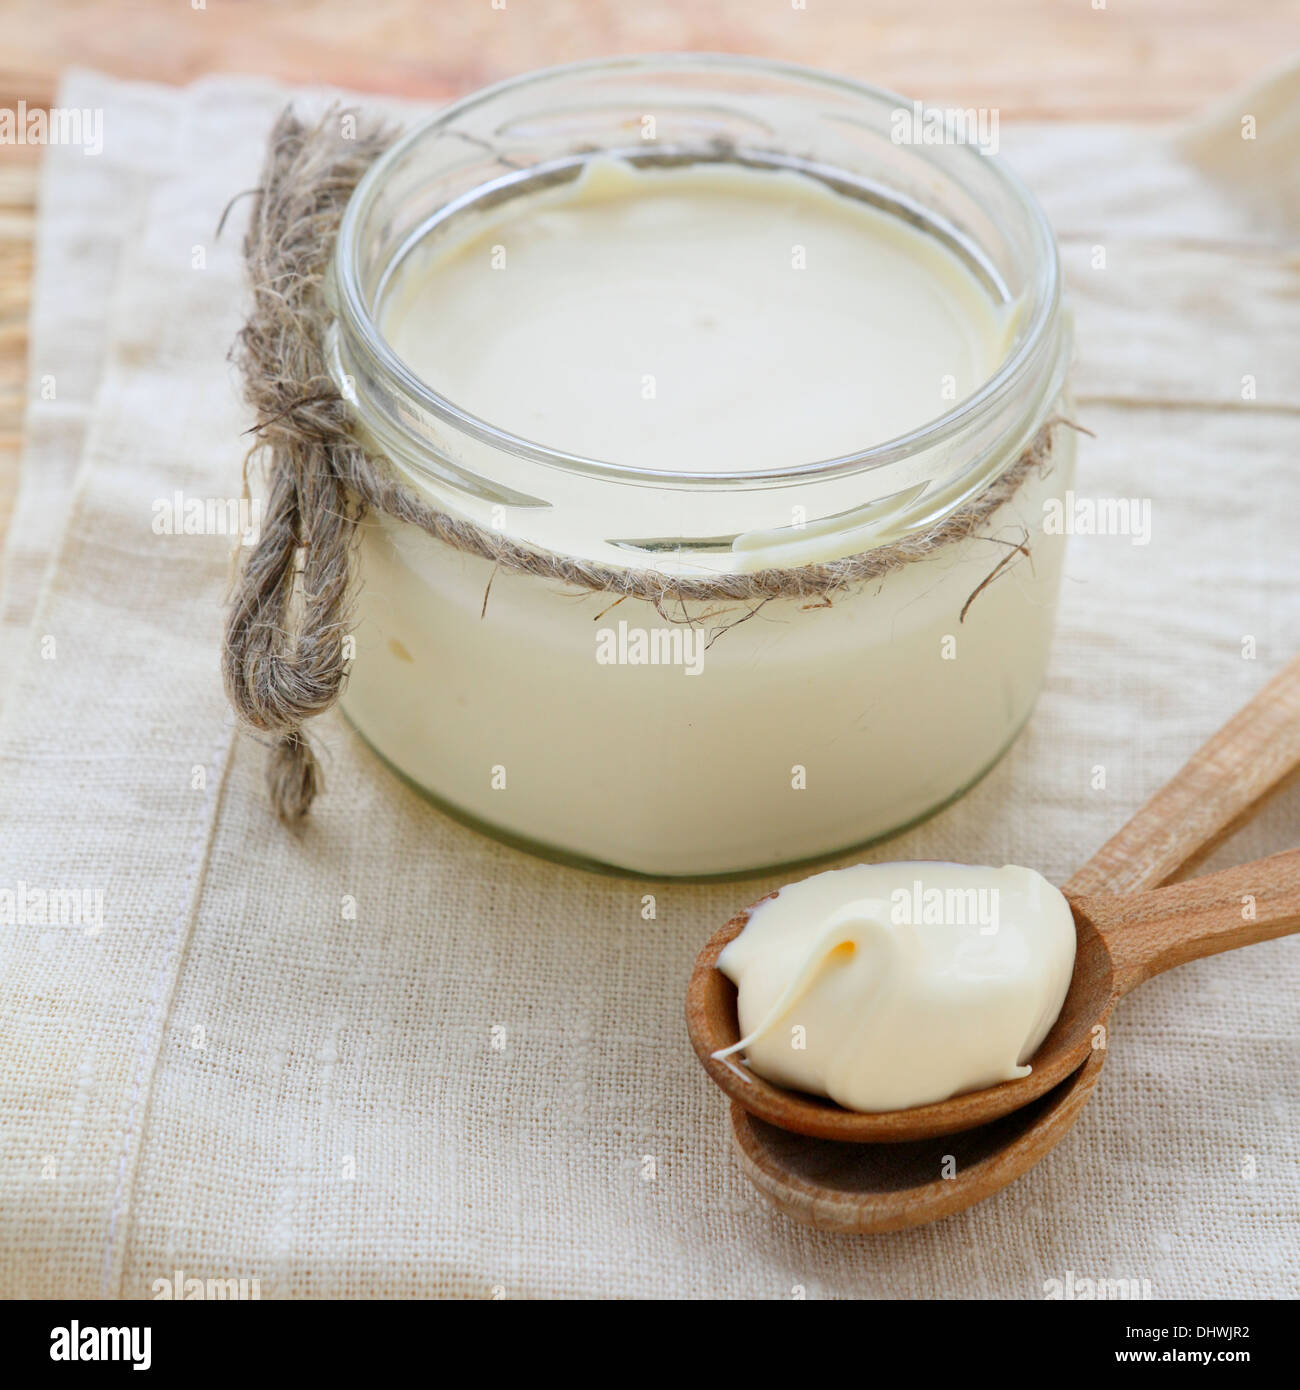 sour cream in a jar, food Stock Photo